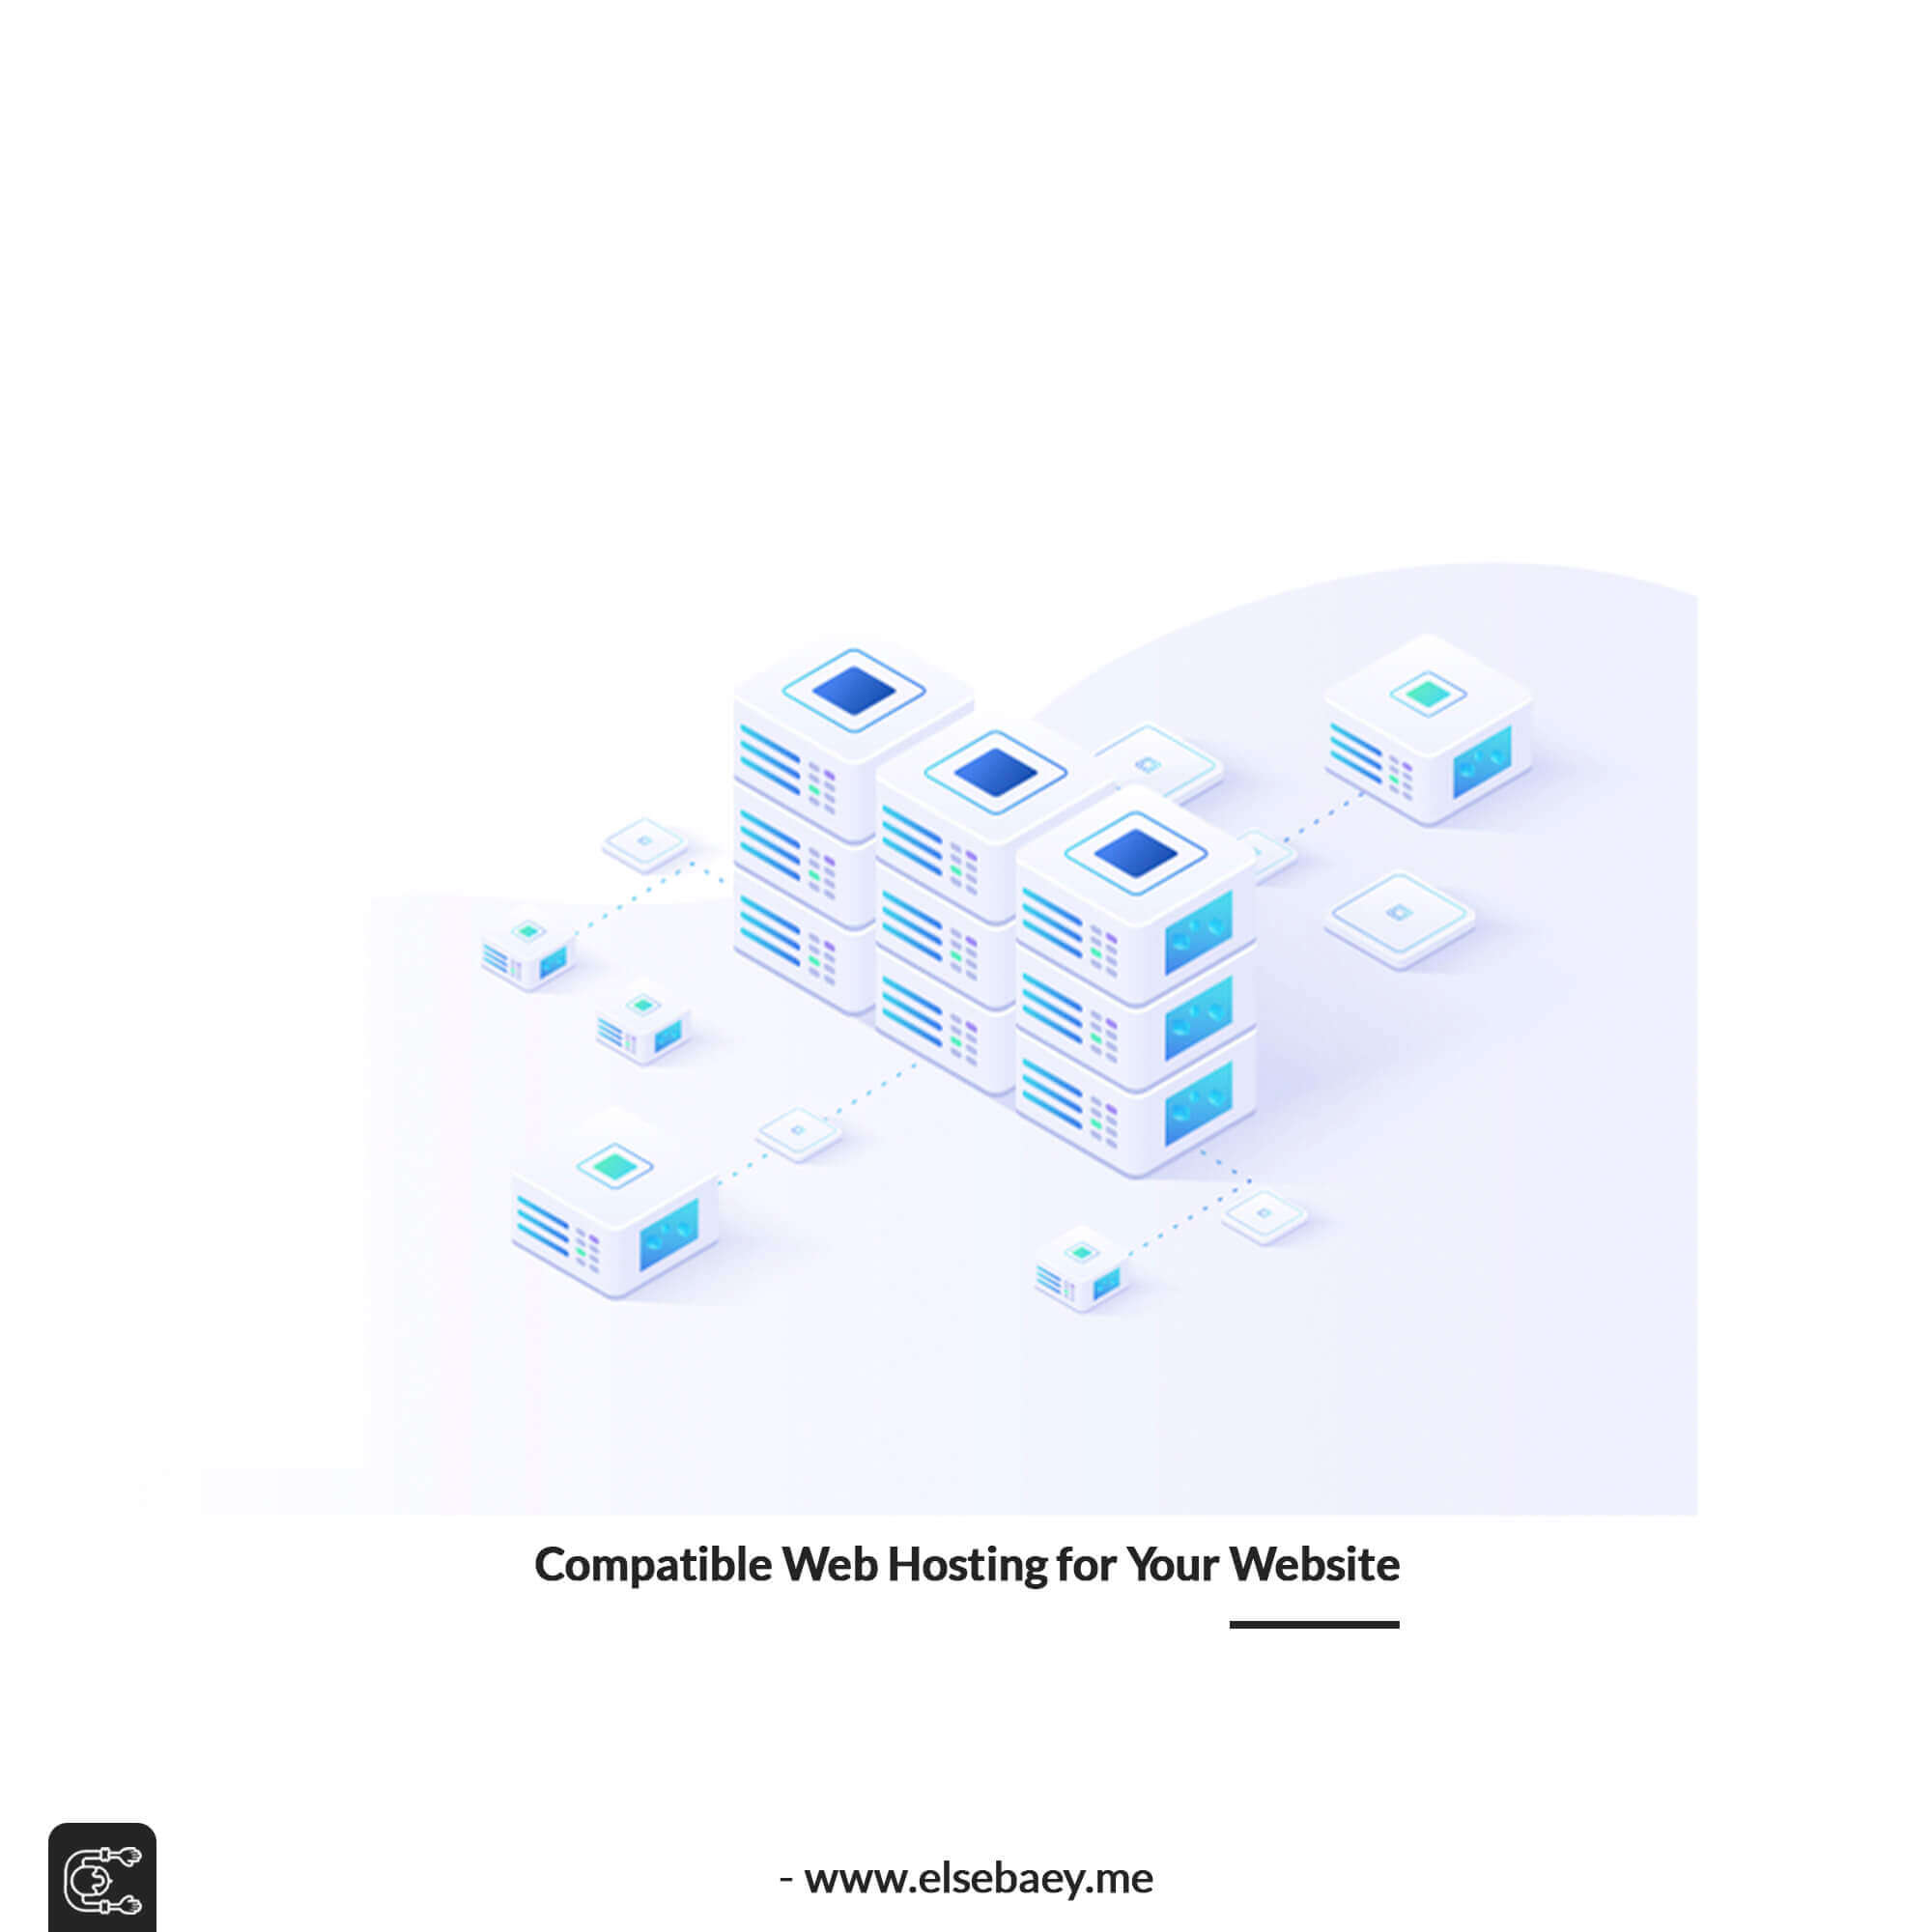 Finding the Best and Compatible Web Hosting for Your Website